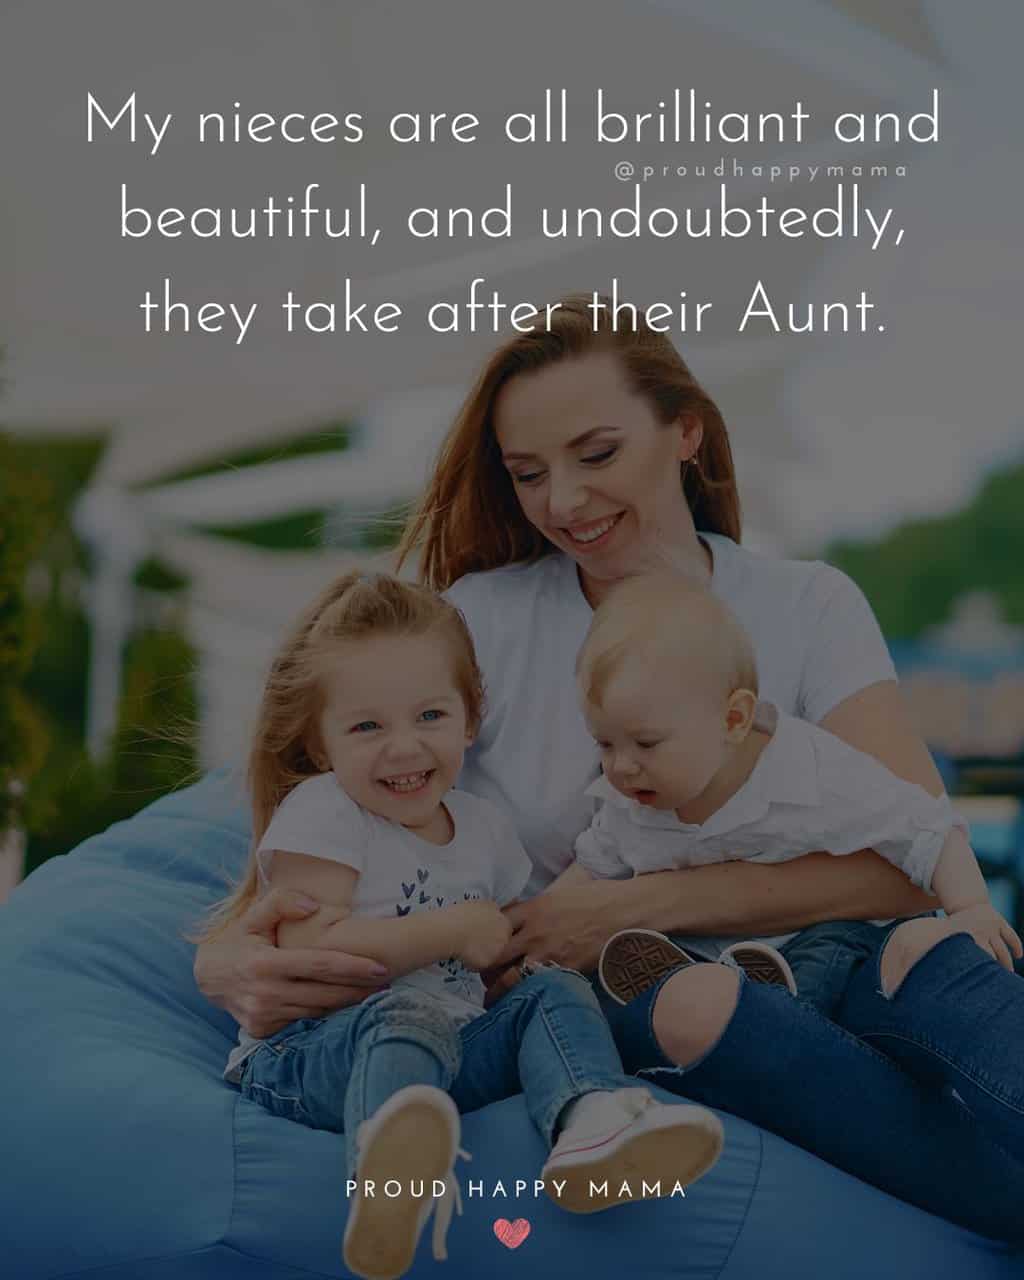 Aunty holding 3 year old niece whilst sitting on a bean bad with an aunt love quote text overlay. ‘My nieces are all brilliant and beautiful, and undoubtedly, they take after their Aunt.’